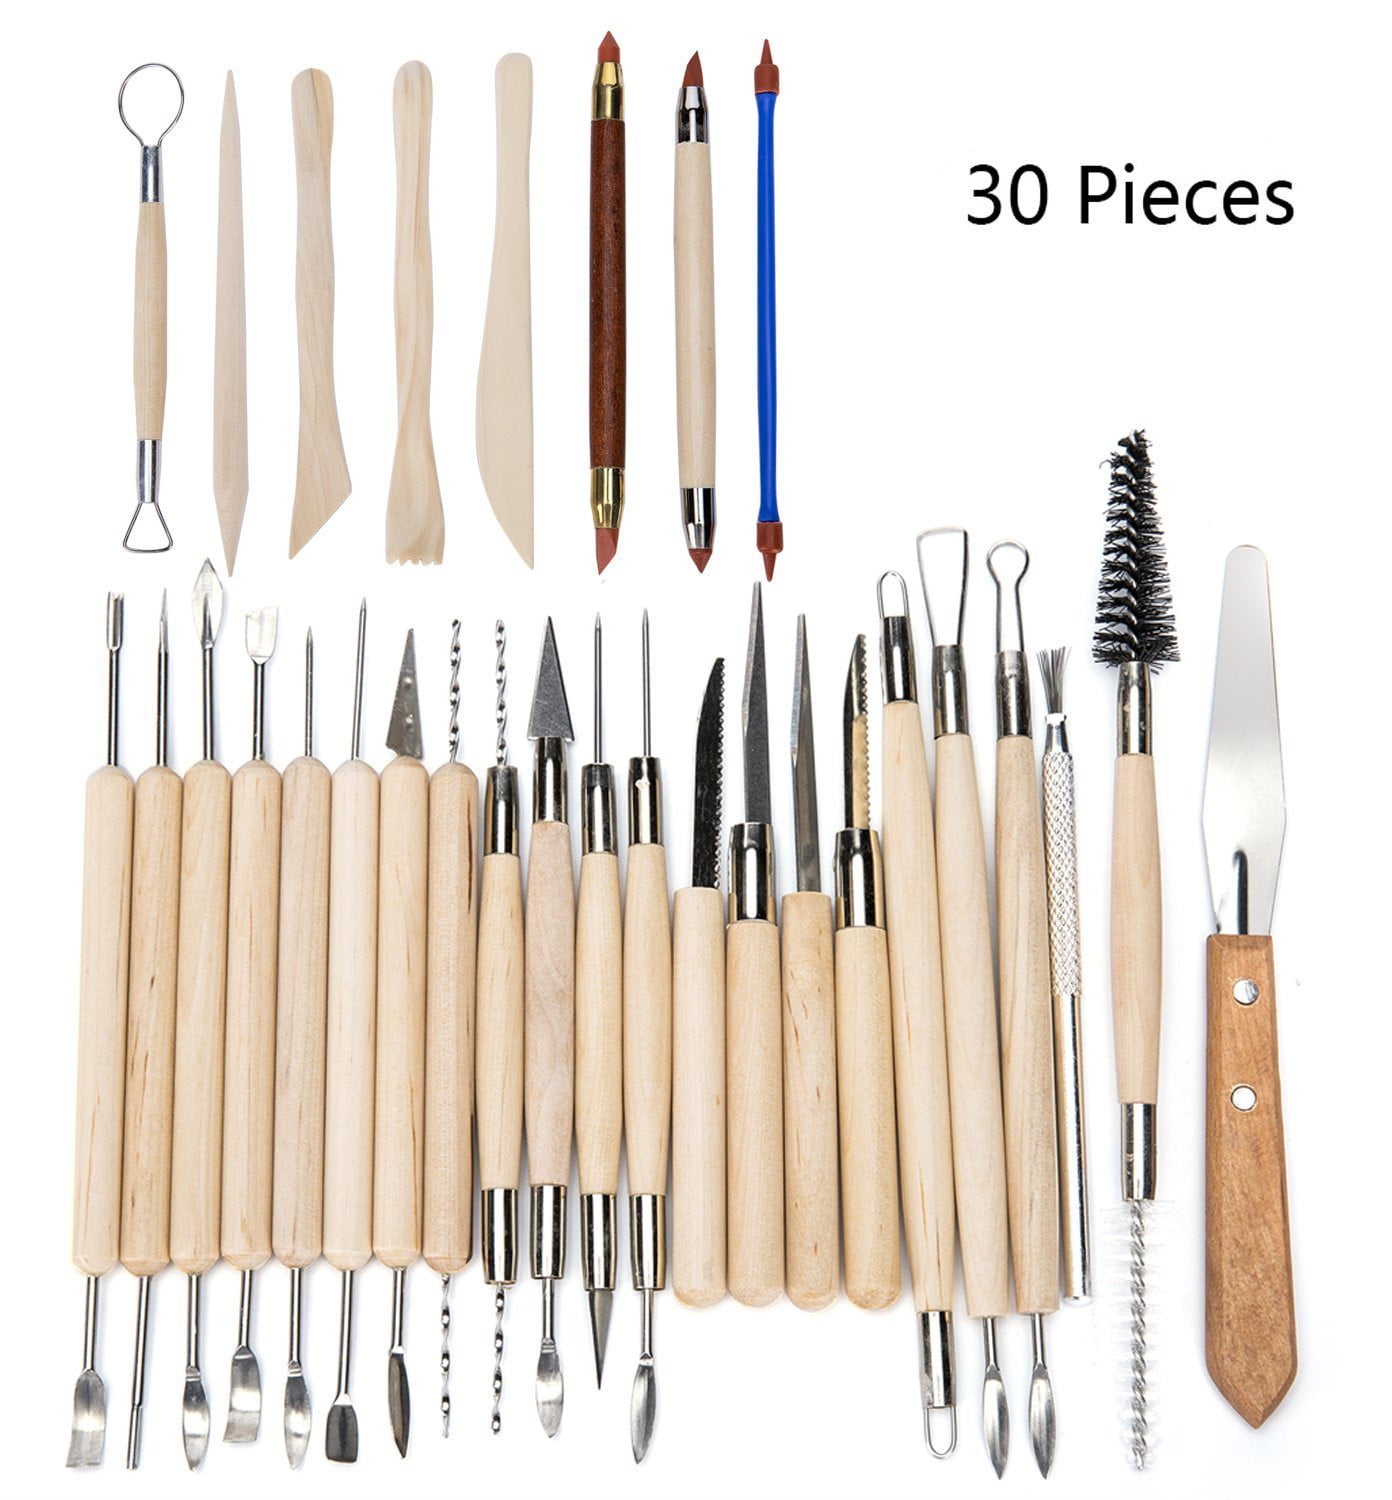 11pcs Pottery Sculpting Tools Clay Sculpting Tools Wooden Pottery Carving Tool Set Ceramic Tools for Shapers and Modeling Embossing Art DIY Pottery Tools for Adults Polymer Clay Tools for Adults 